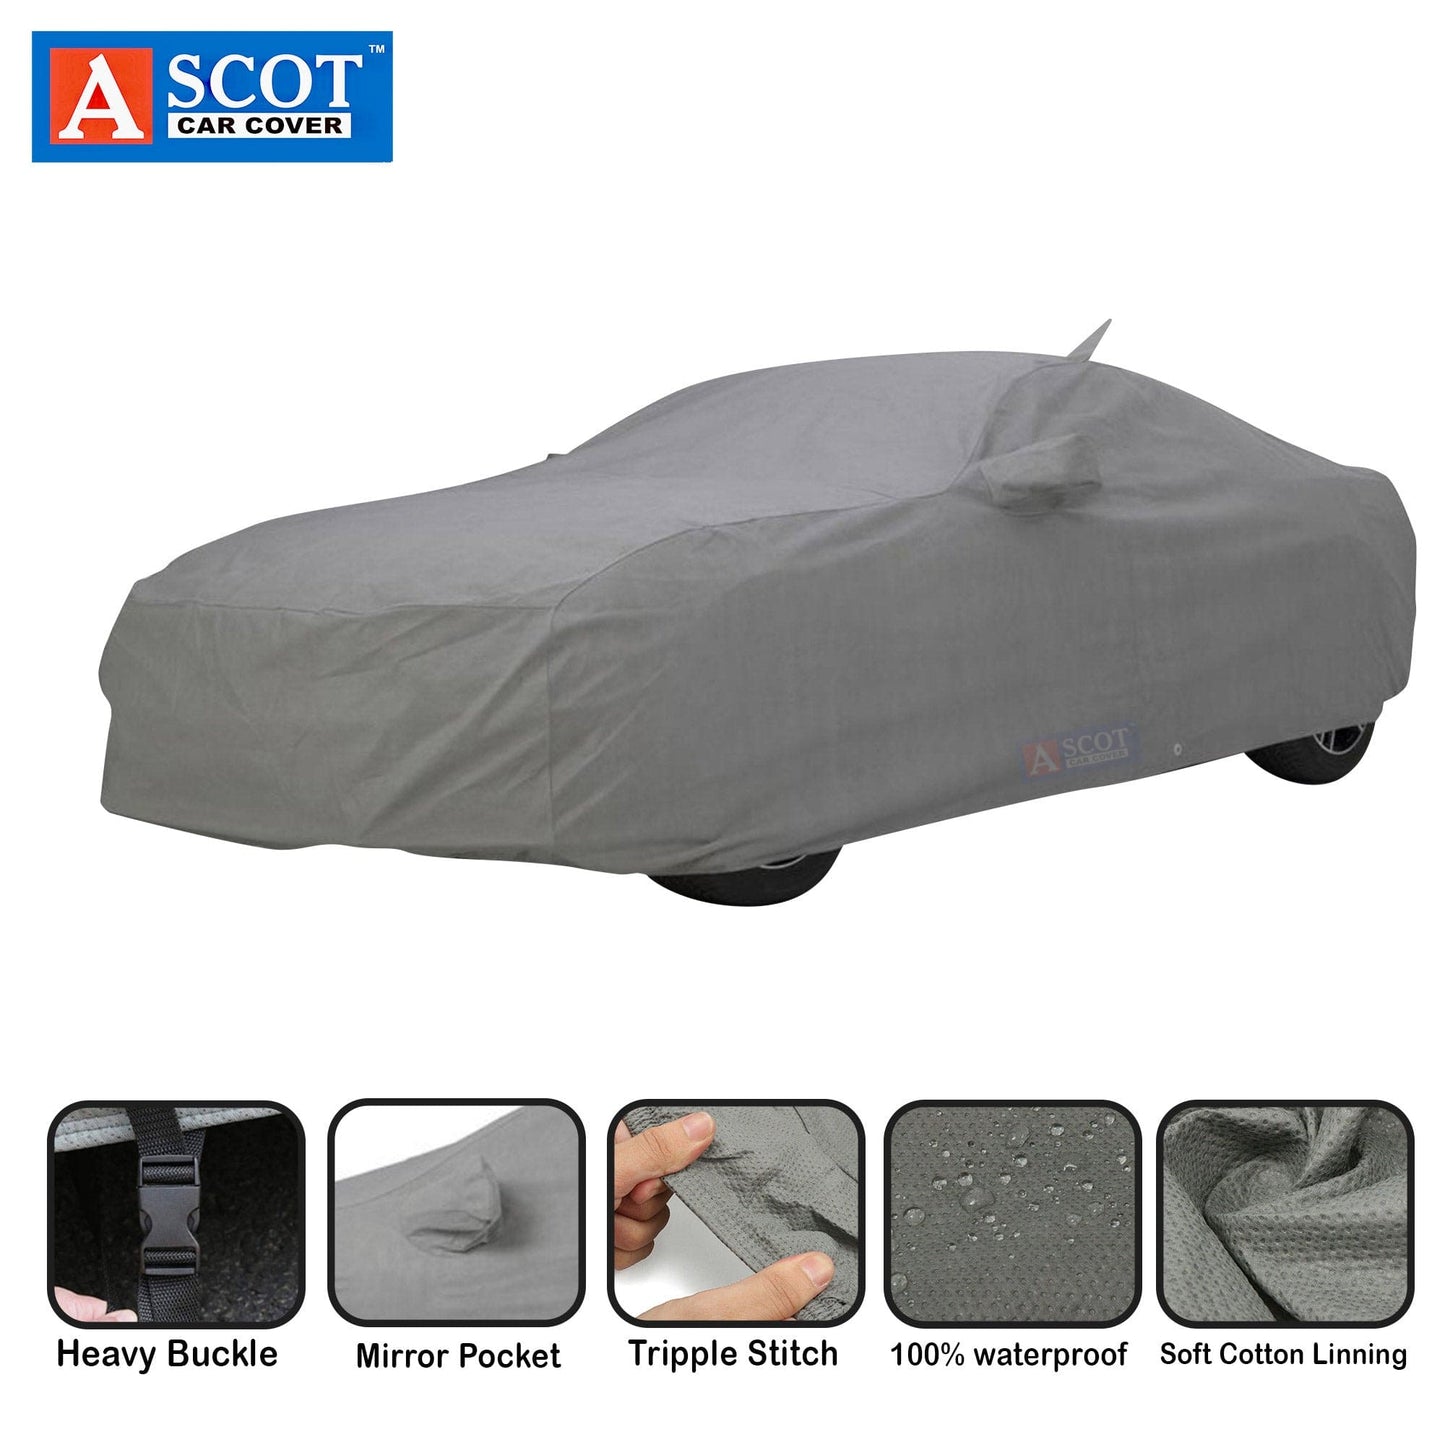 Ascot BMW M5 Car Cover Waterproof 2004-2010 Model 3 Layers Custom-Fit All Weather Heat Resistant UV Proof